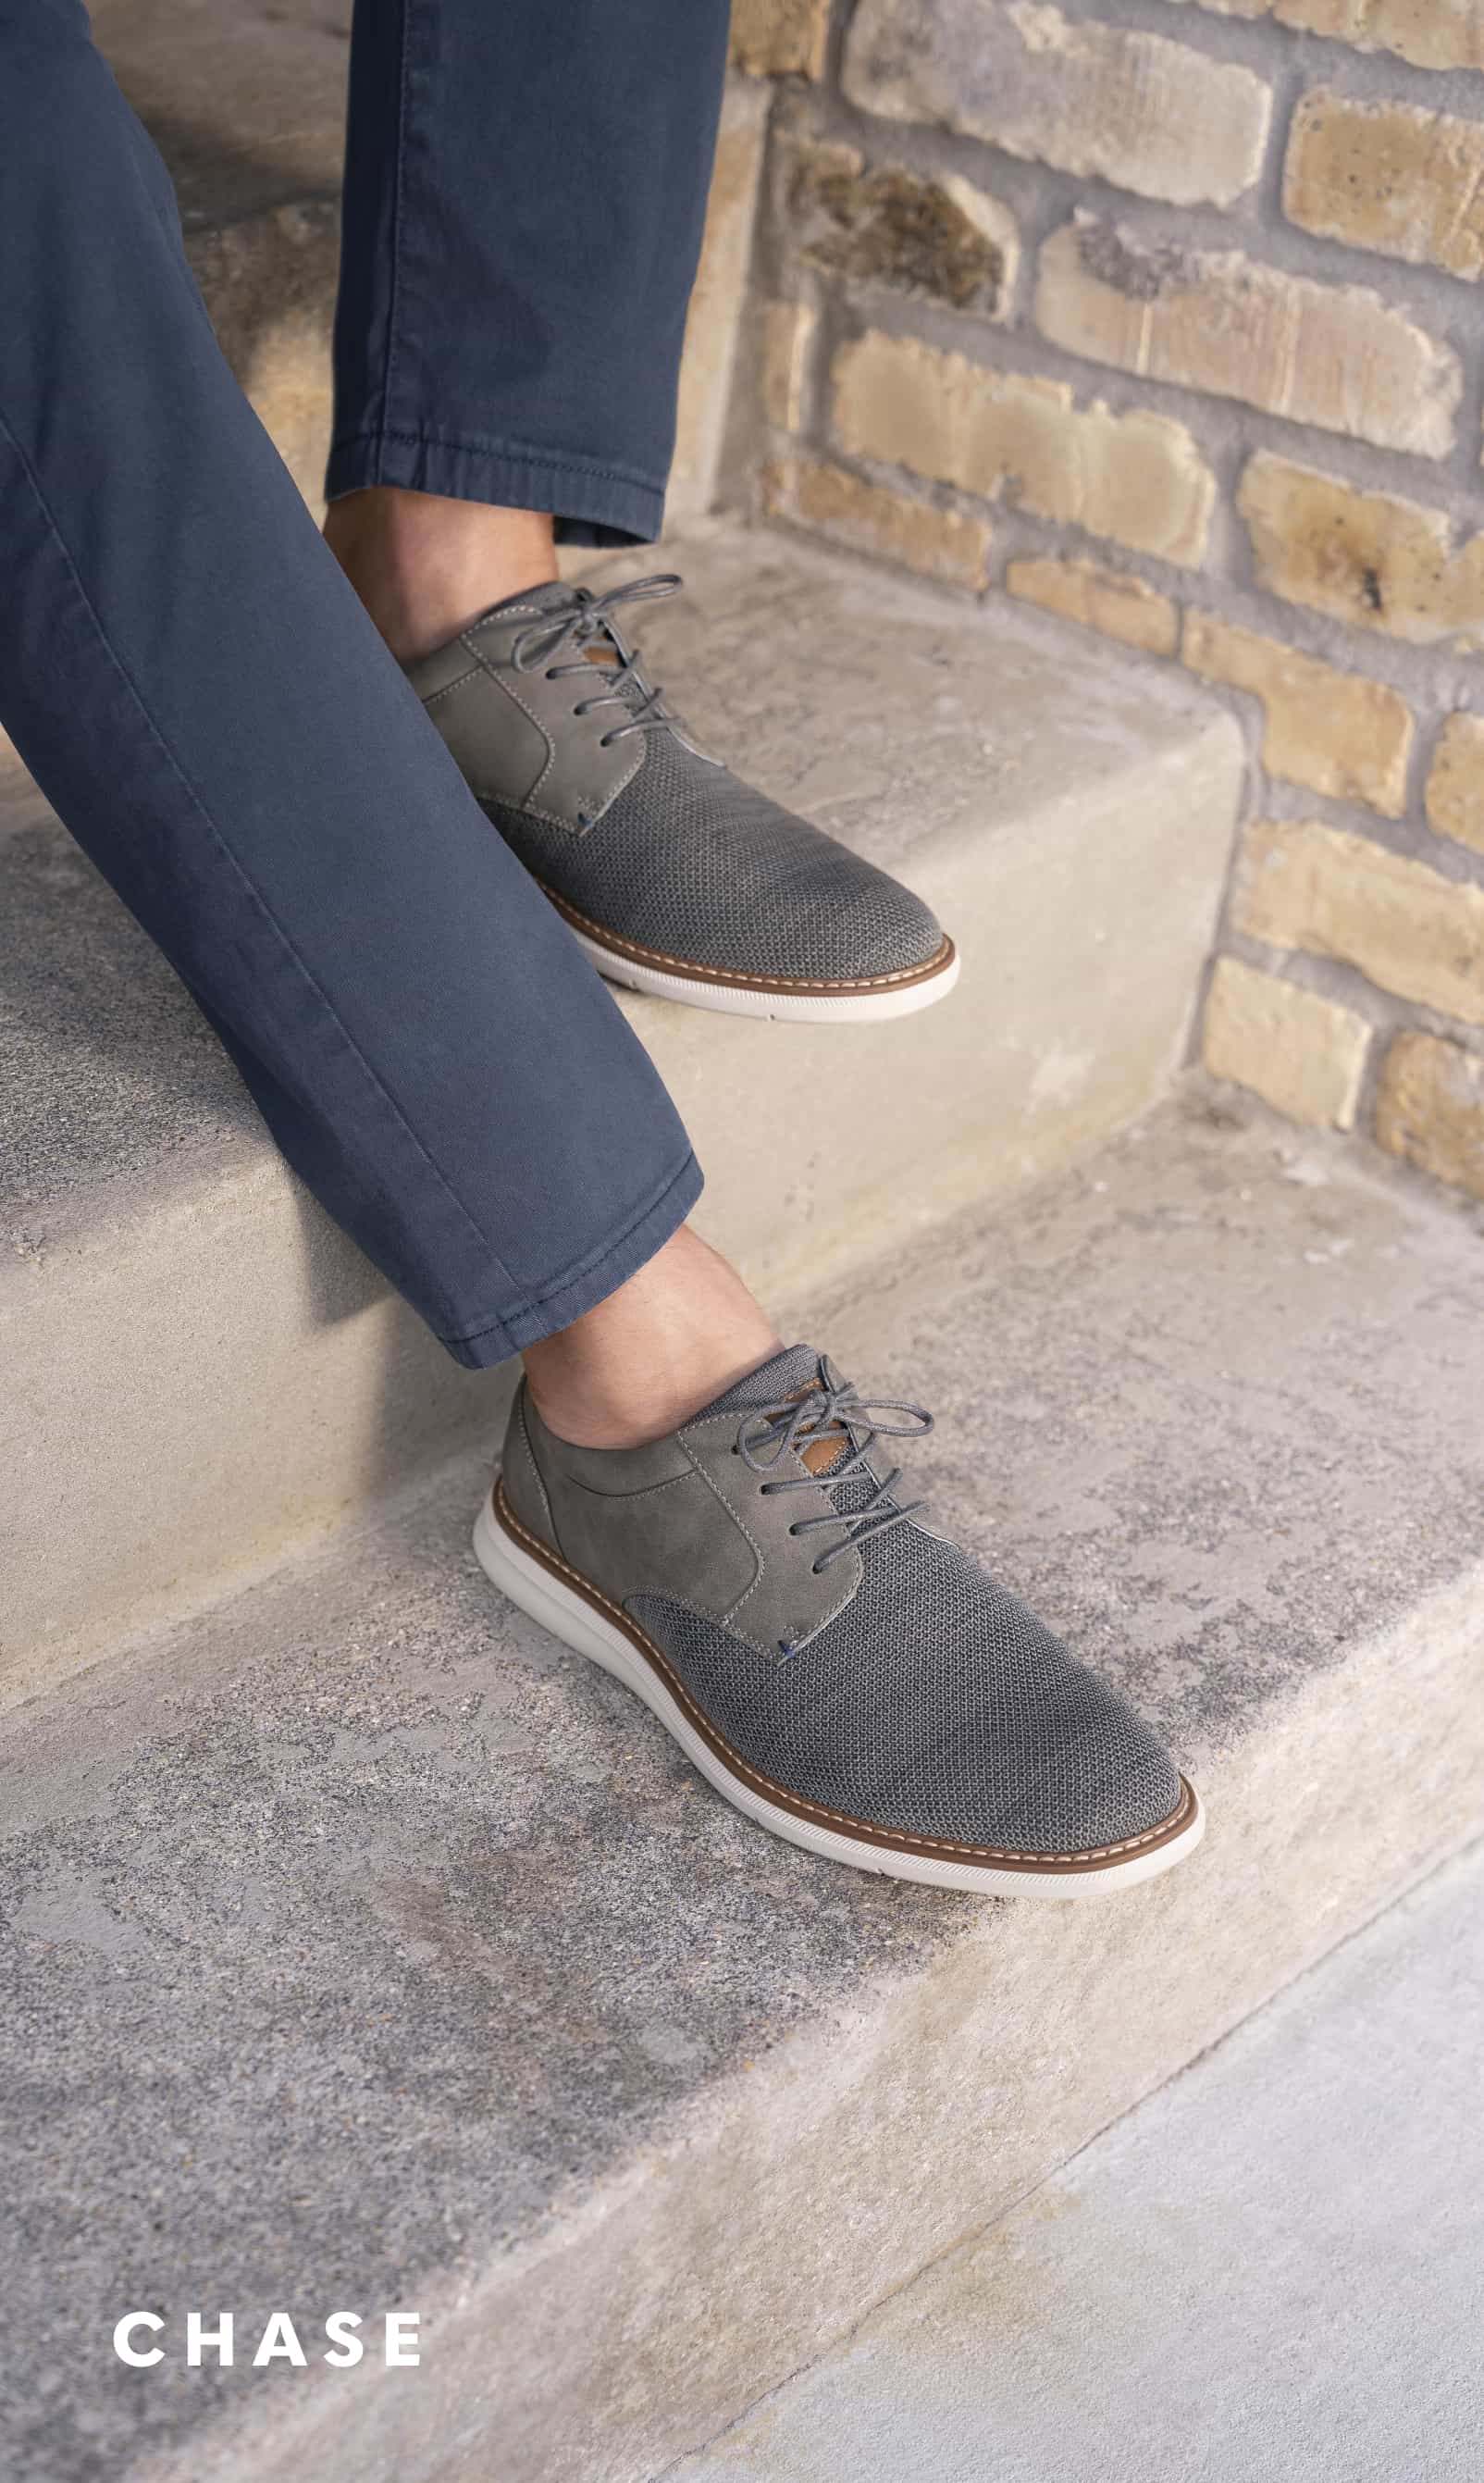 Men's Dress Shoes category. Image features the Chase Knit in grey.